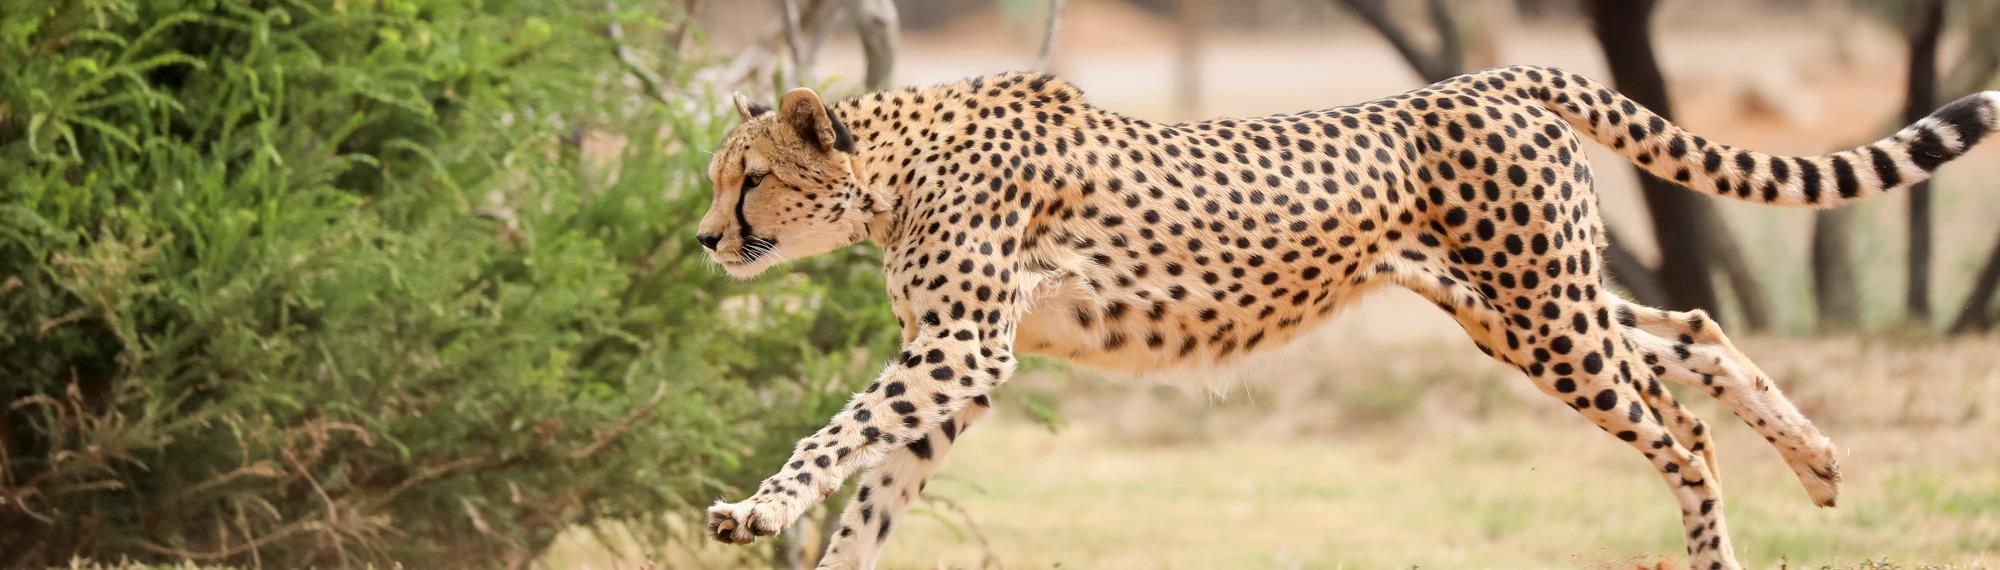 Side view of Kulinda the cheetah running towards the left with a shrub behind her.